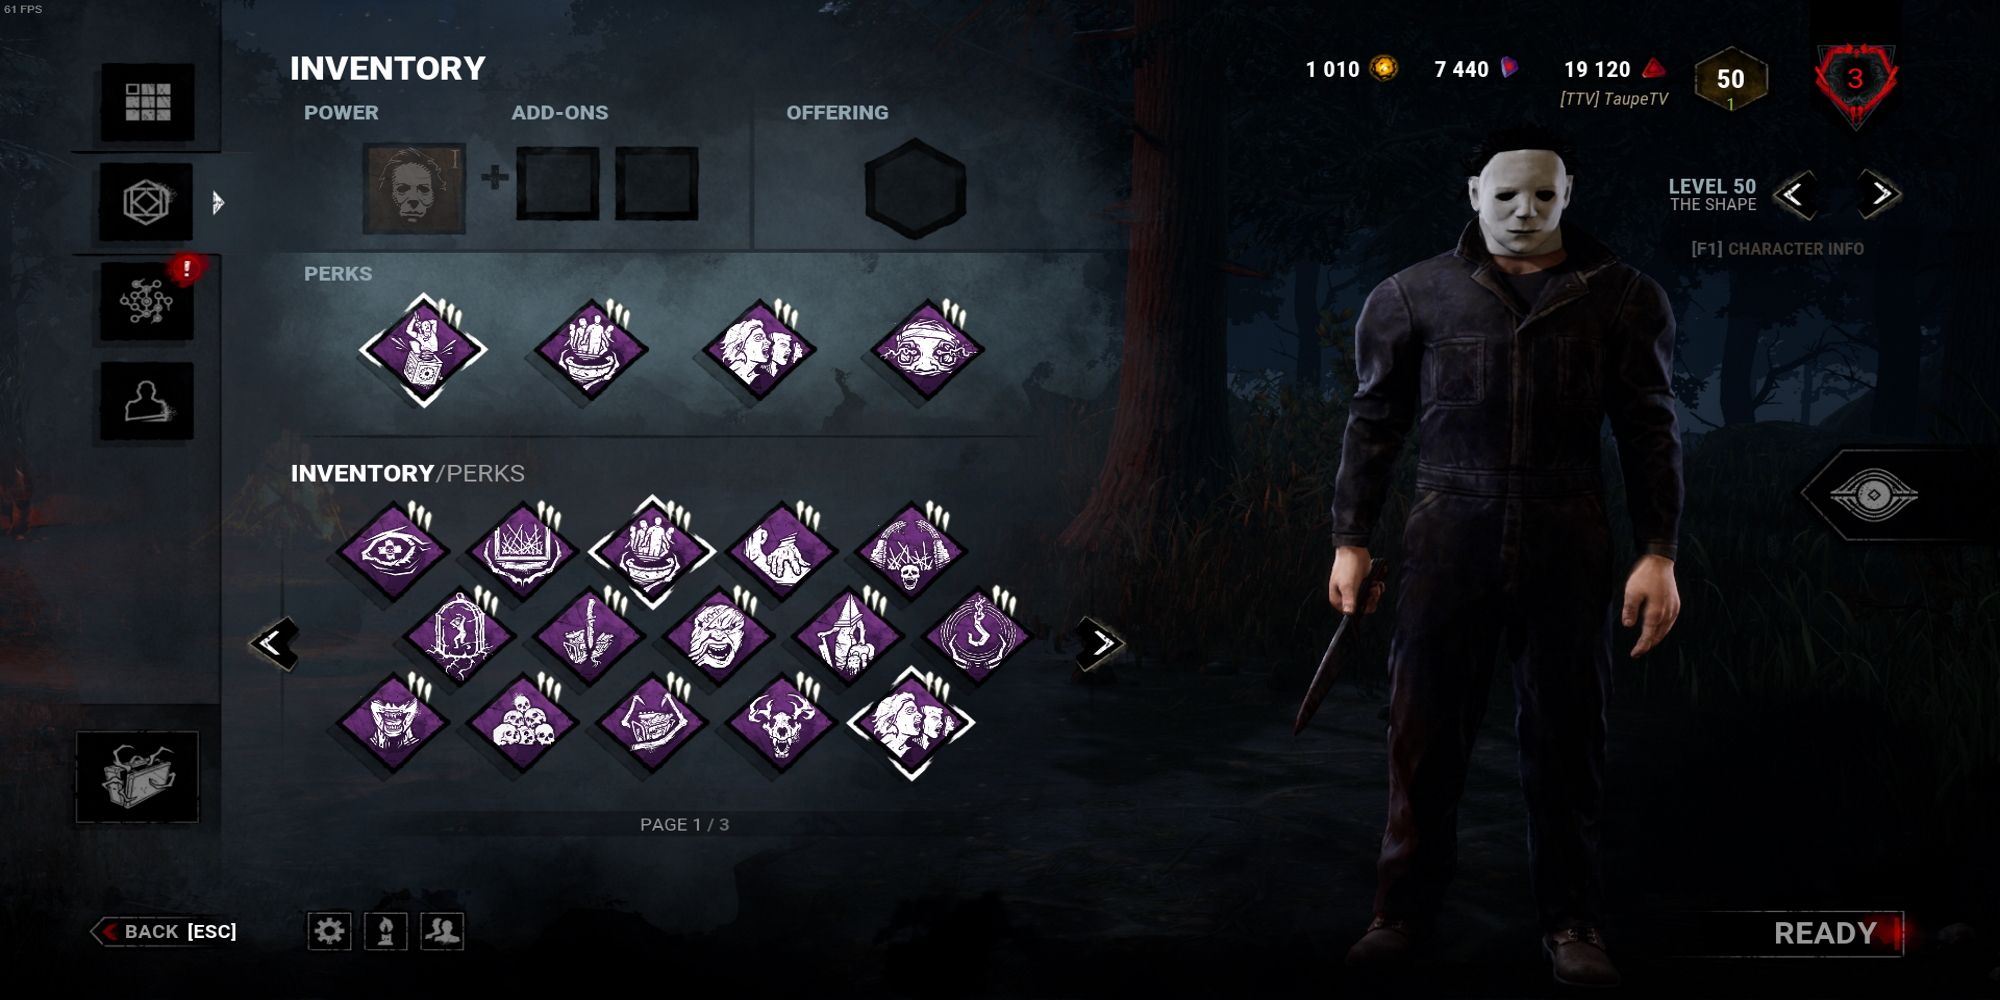 The Shape Dead By Daylight loadout with perks and add-ons